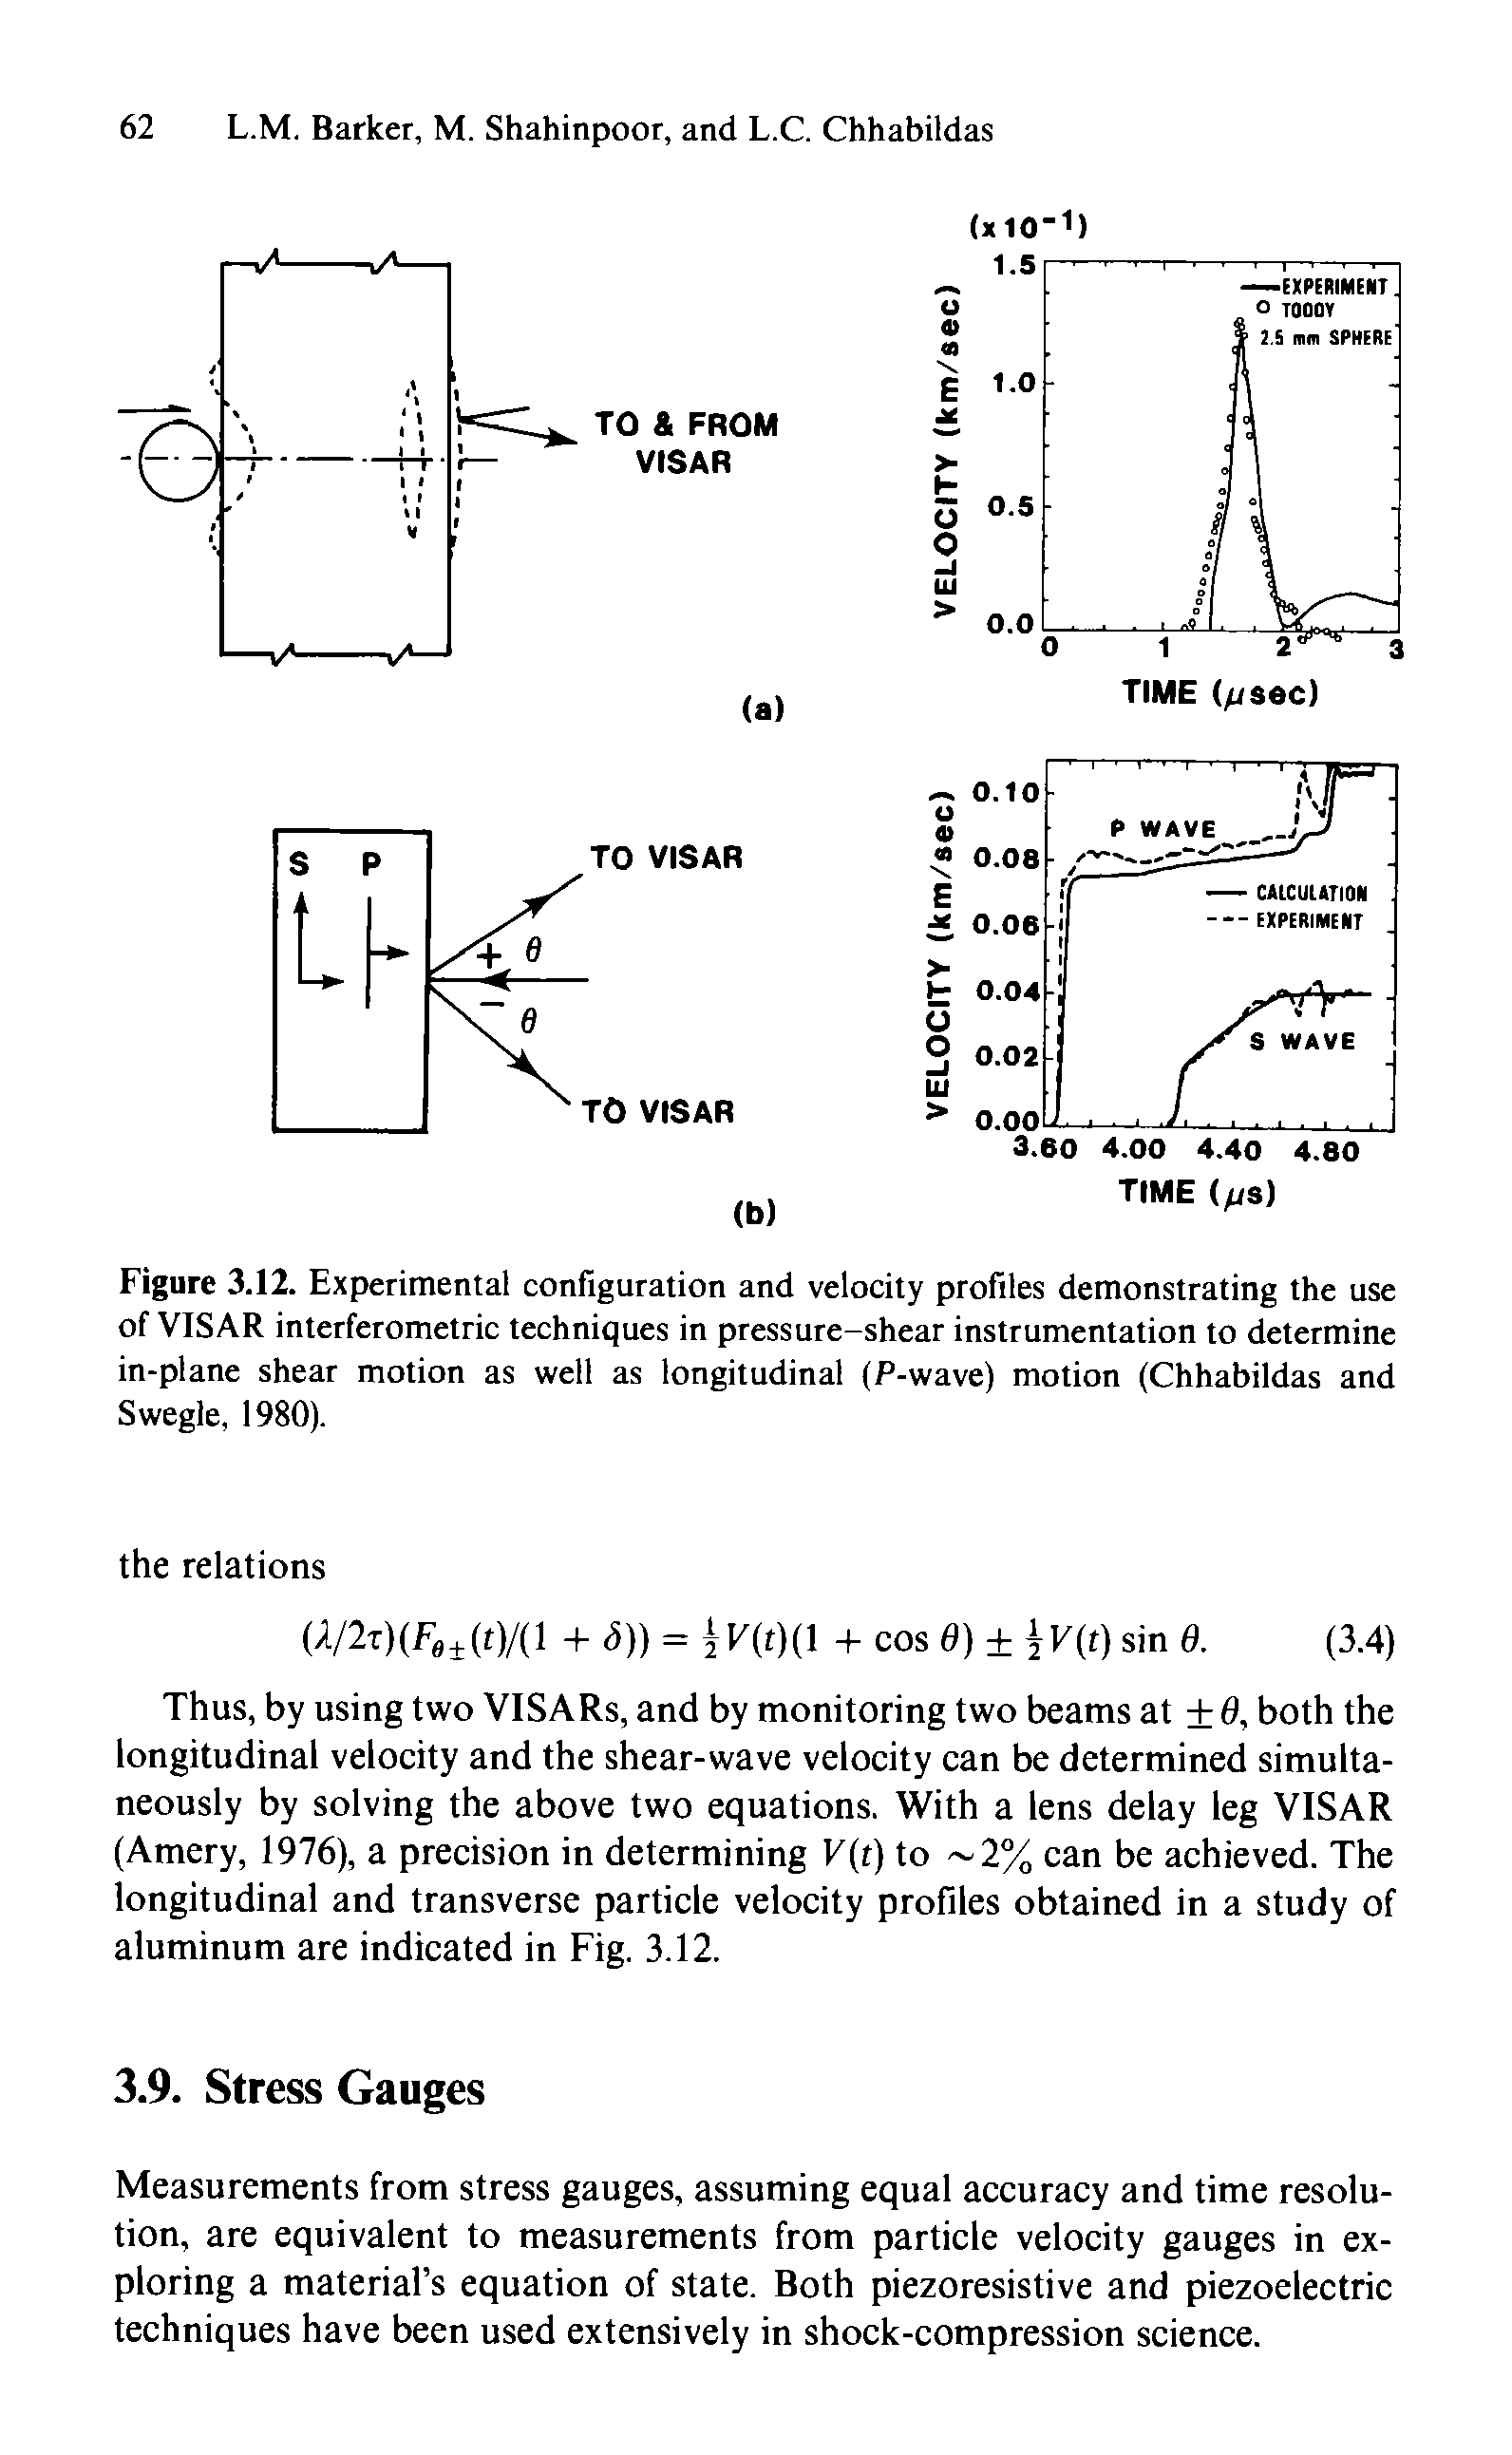 Figure 3.12. Experimental configuration and velocity profiles demonstrating the use of VISAR interferometric techniques in pressure-shear instrumentation to determine in-plane shear motion as well as longitudinal (P-wave) motion (Chhabildas and Swegle, 1980).